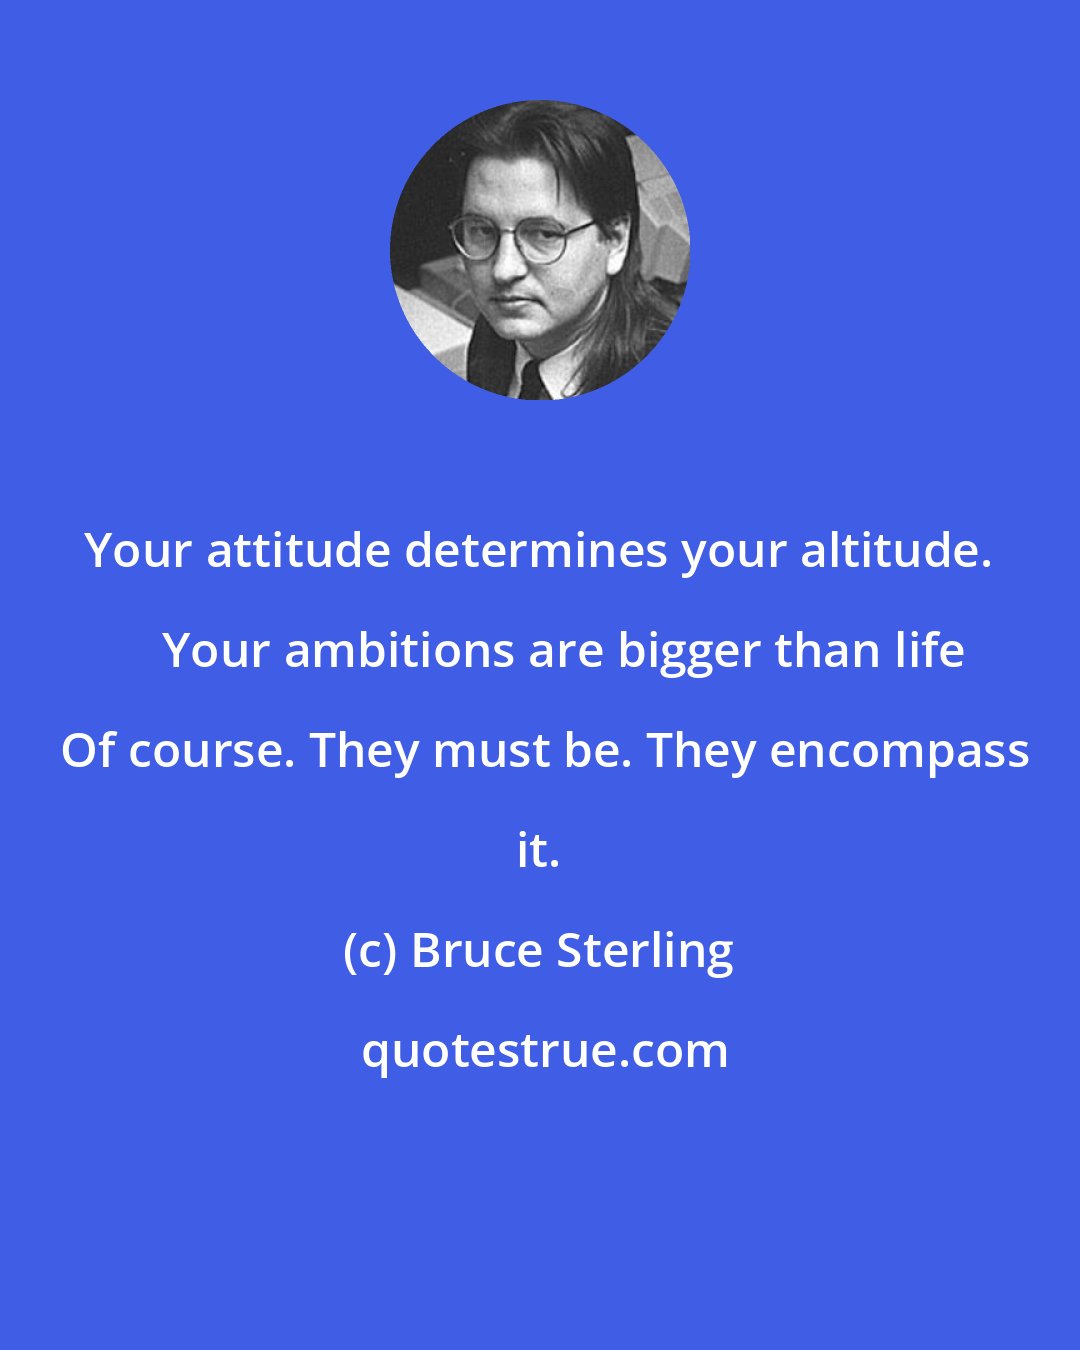 Bruce Sterling: Your attitude determines your altitude.     Your ambitions are bigger than life  Of course. They must be. They encompass it.